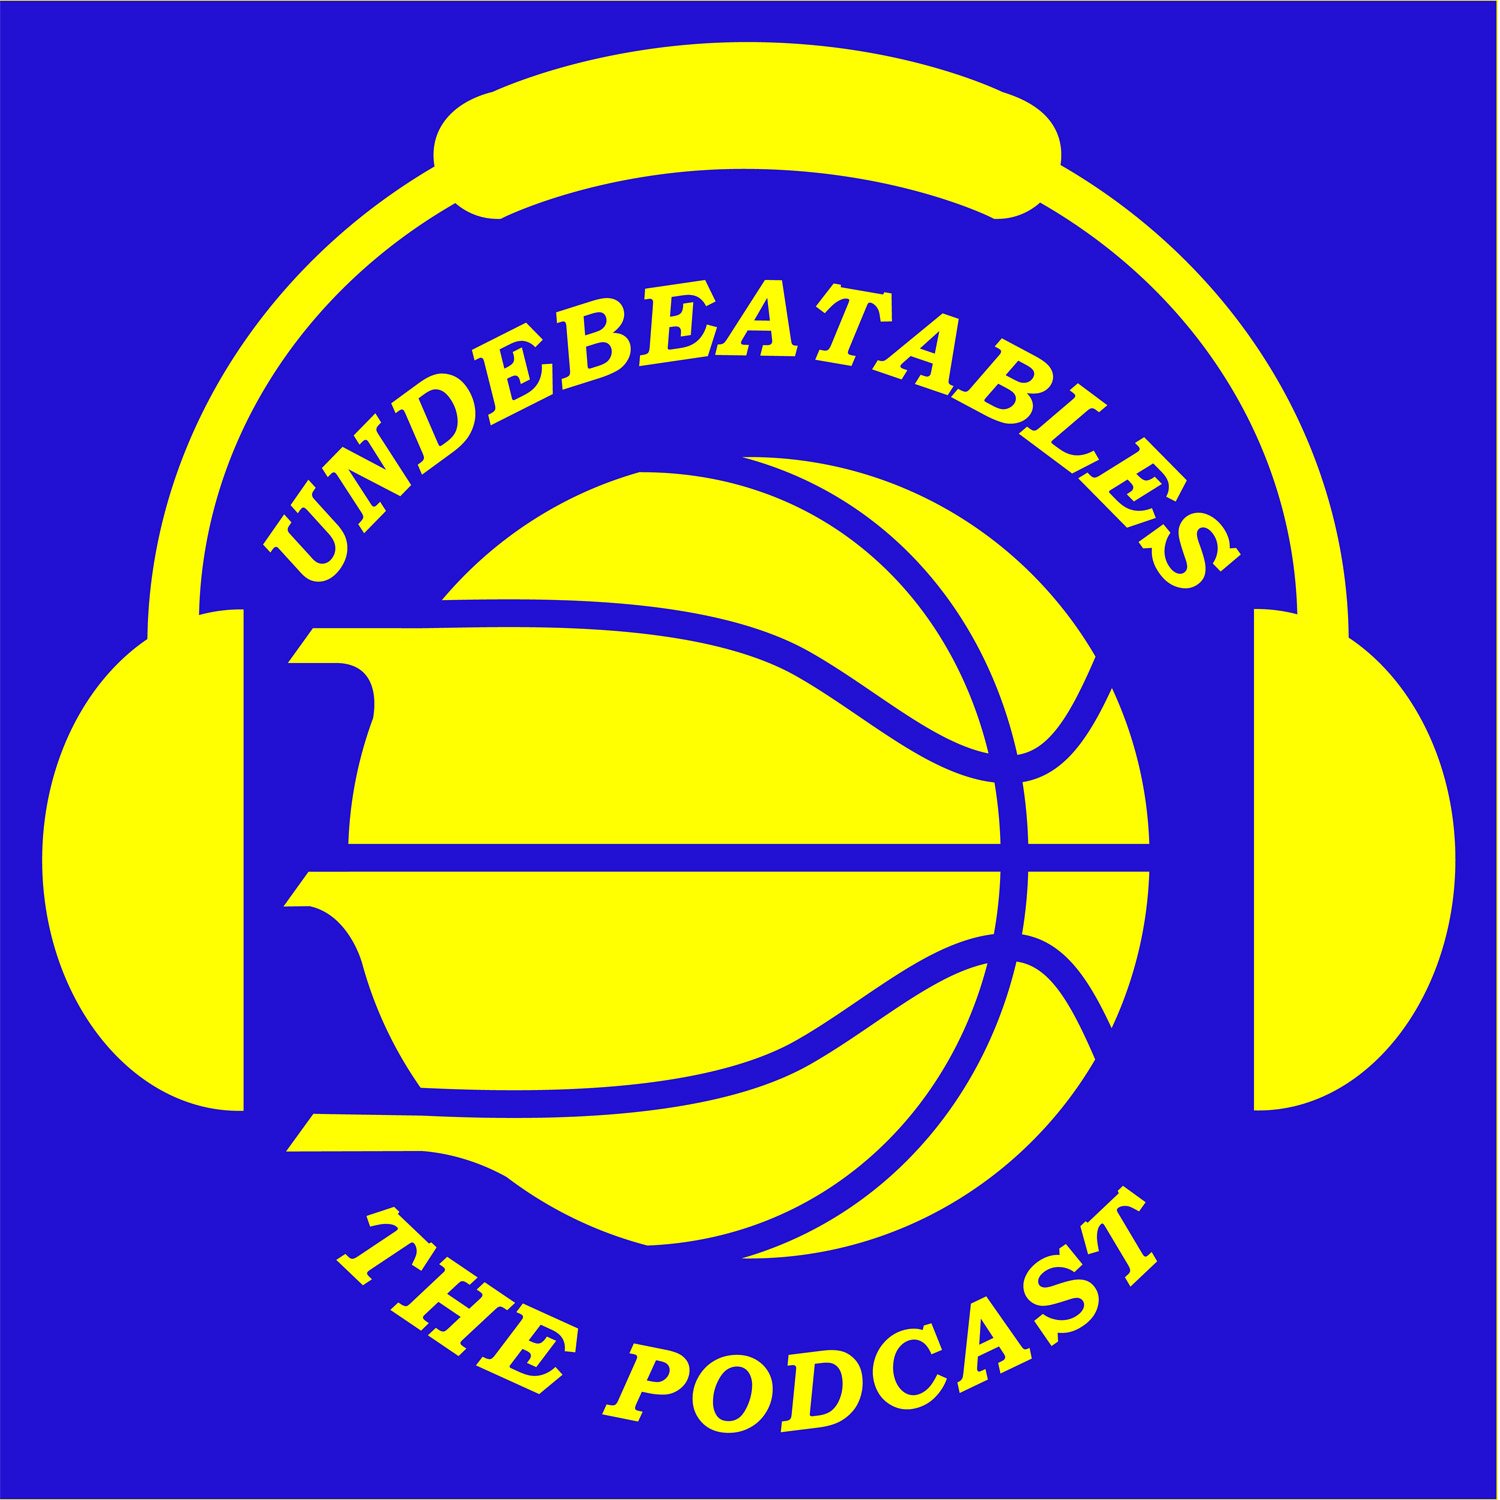 The Undebeatables - Episode 703: I'll Take The Over Under